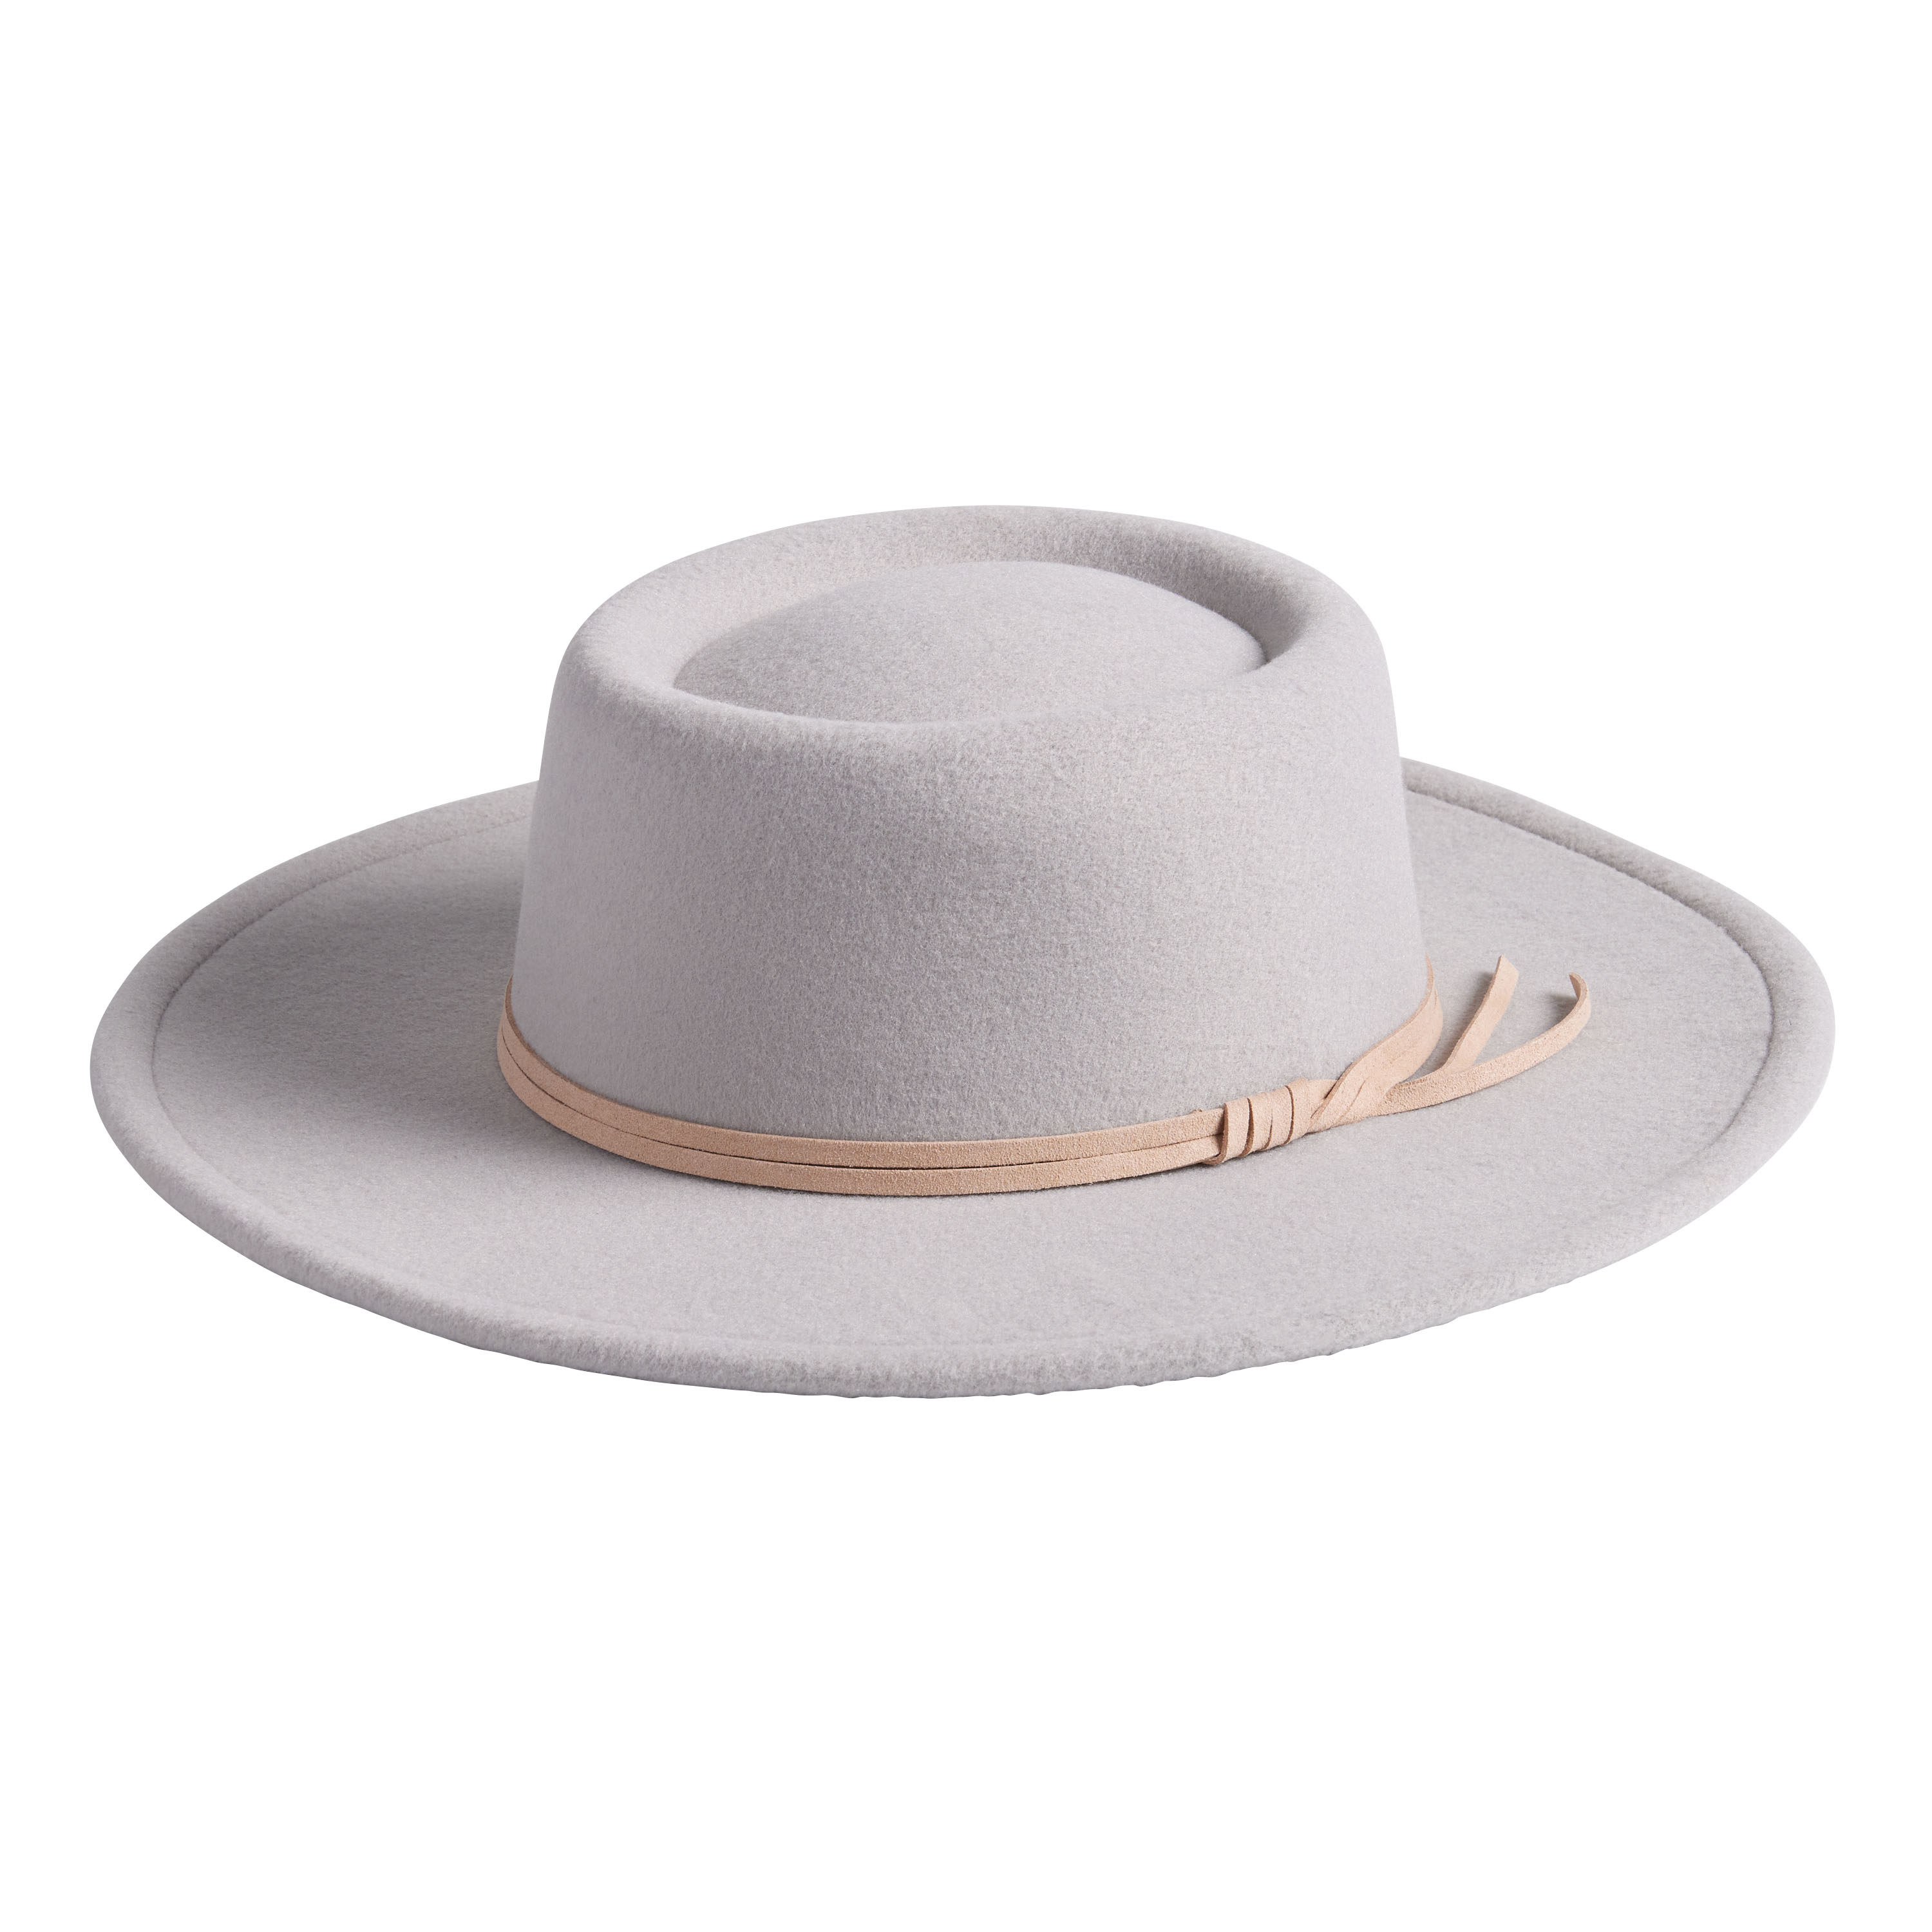 Dove Gray Recycled Boater Hat With Tan Trim - World Market